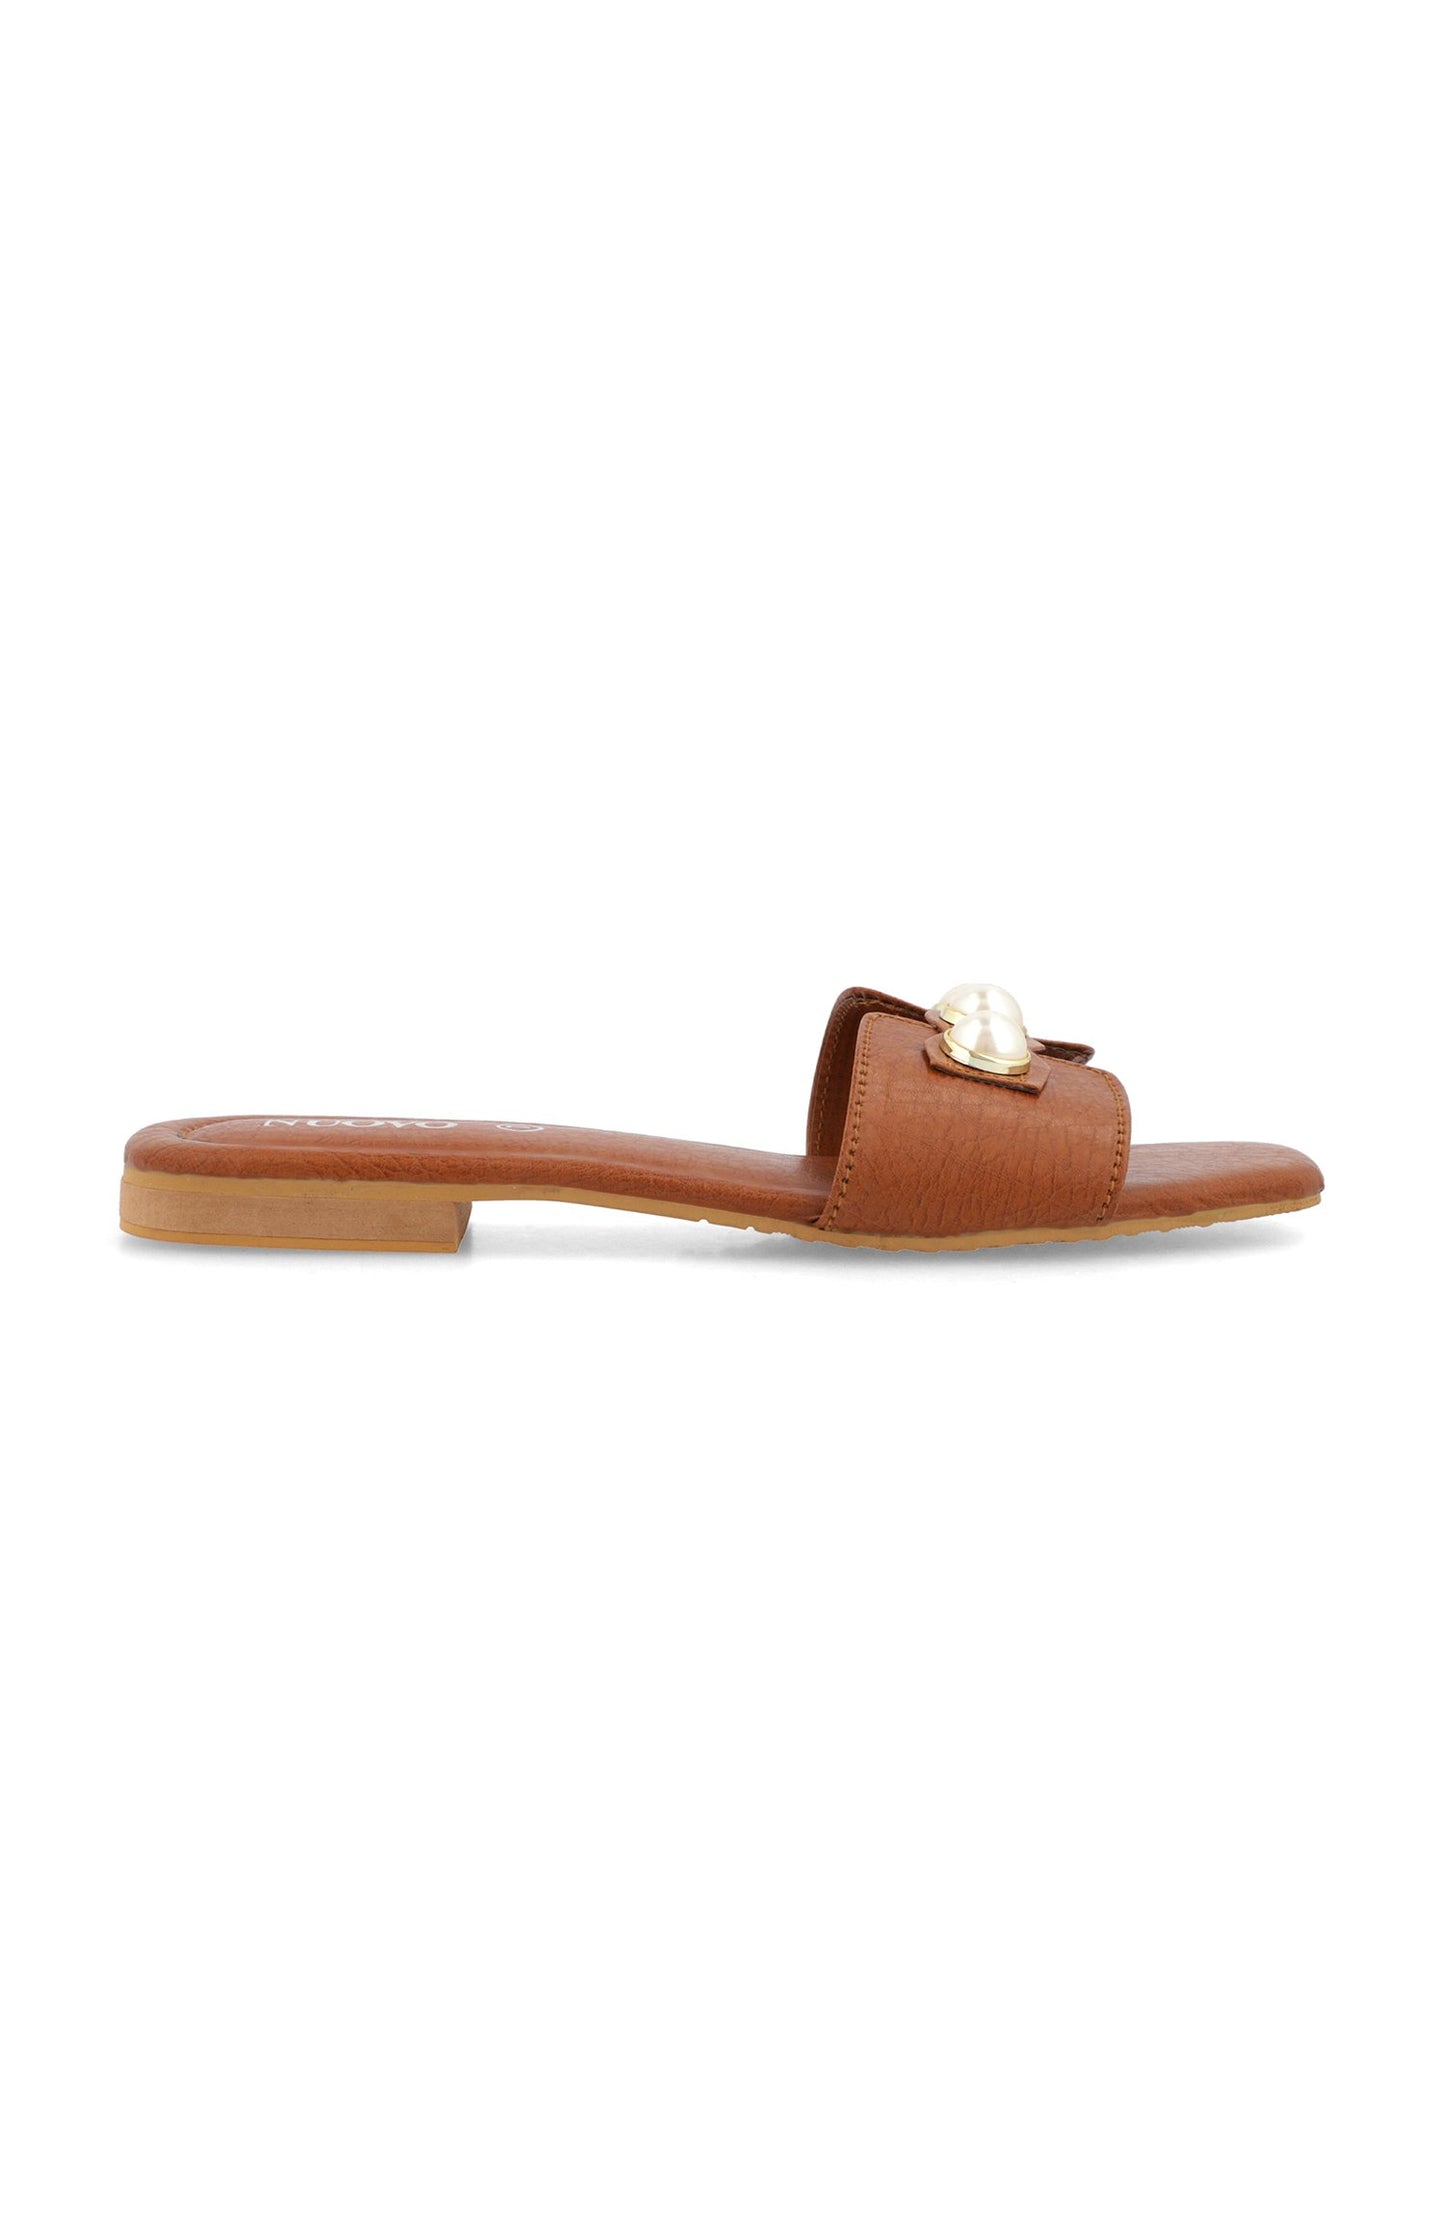 Women Slippers - Brown (ORFS-57 BROWN)